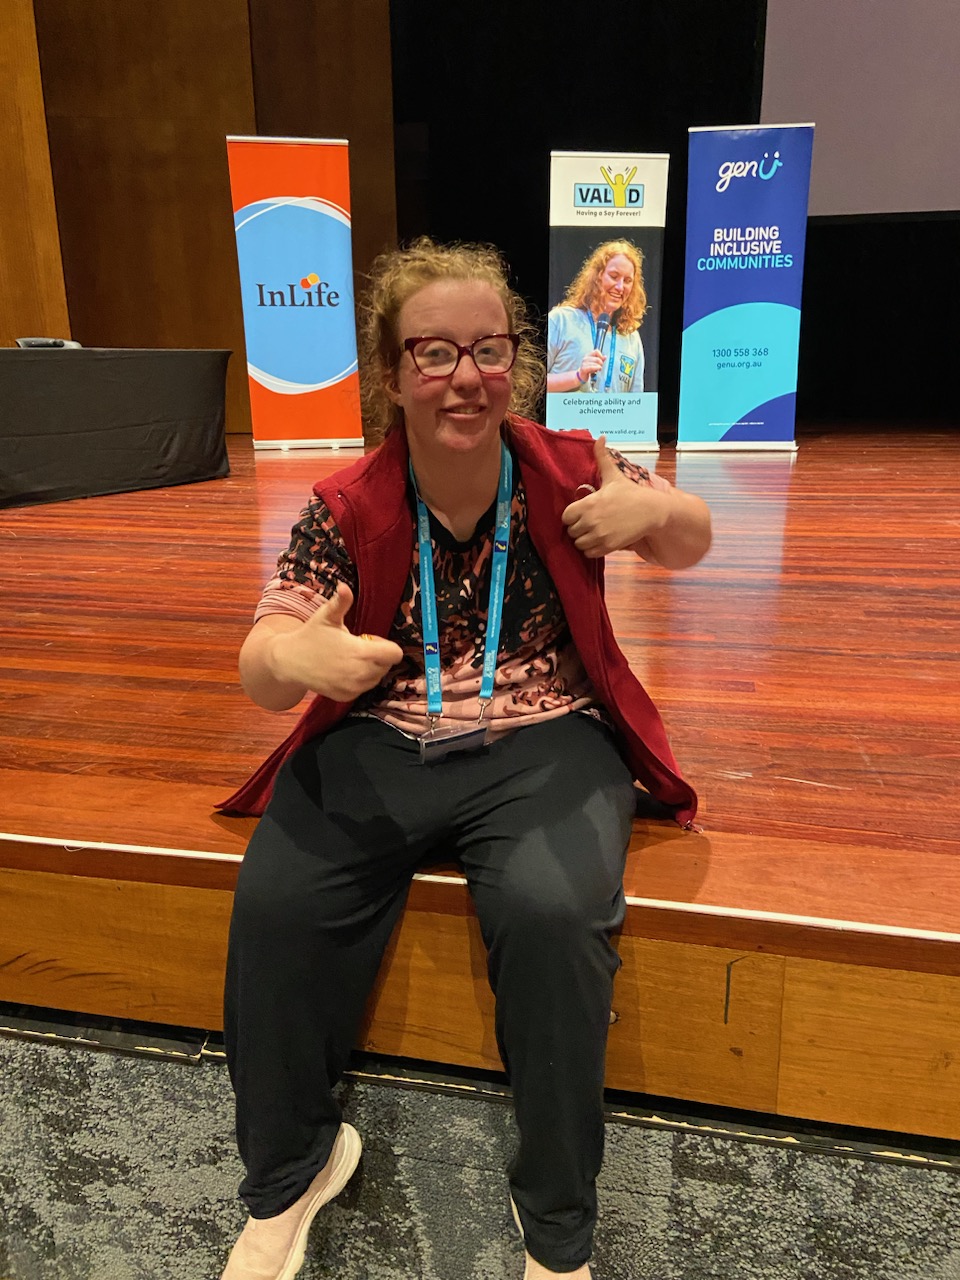 Jasmin sits on a stage at the VALID conference while smiling and getting two thumbs up